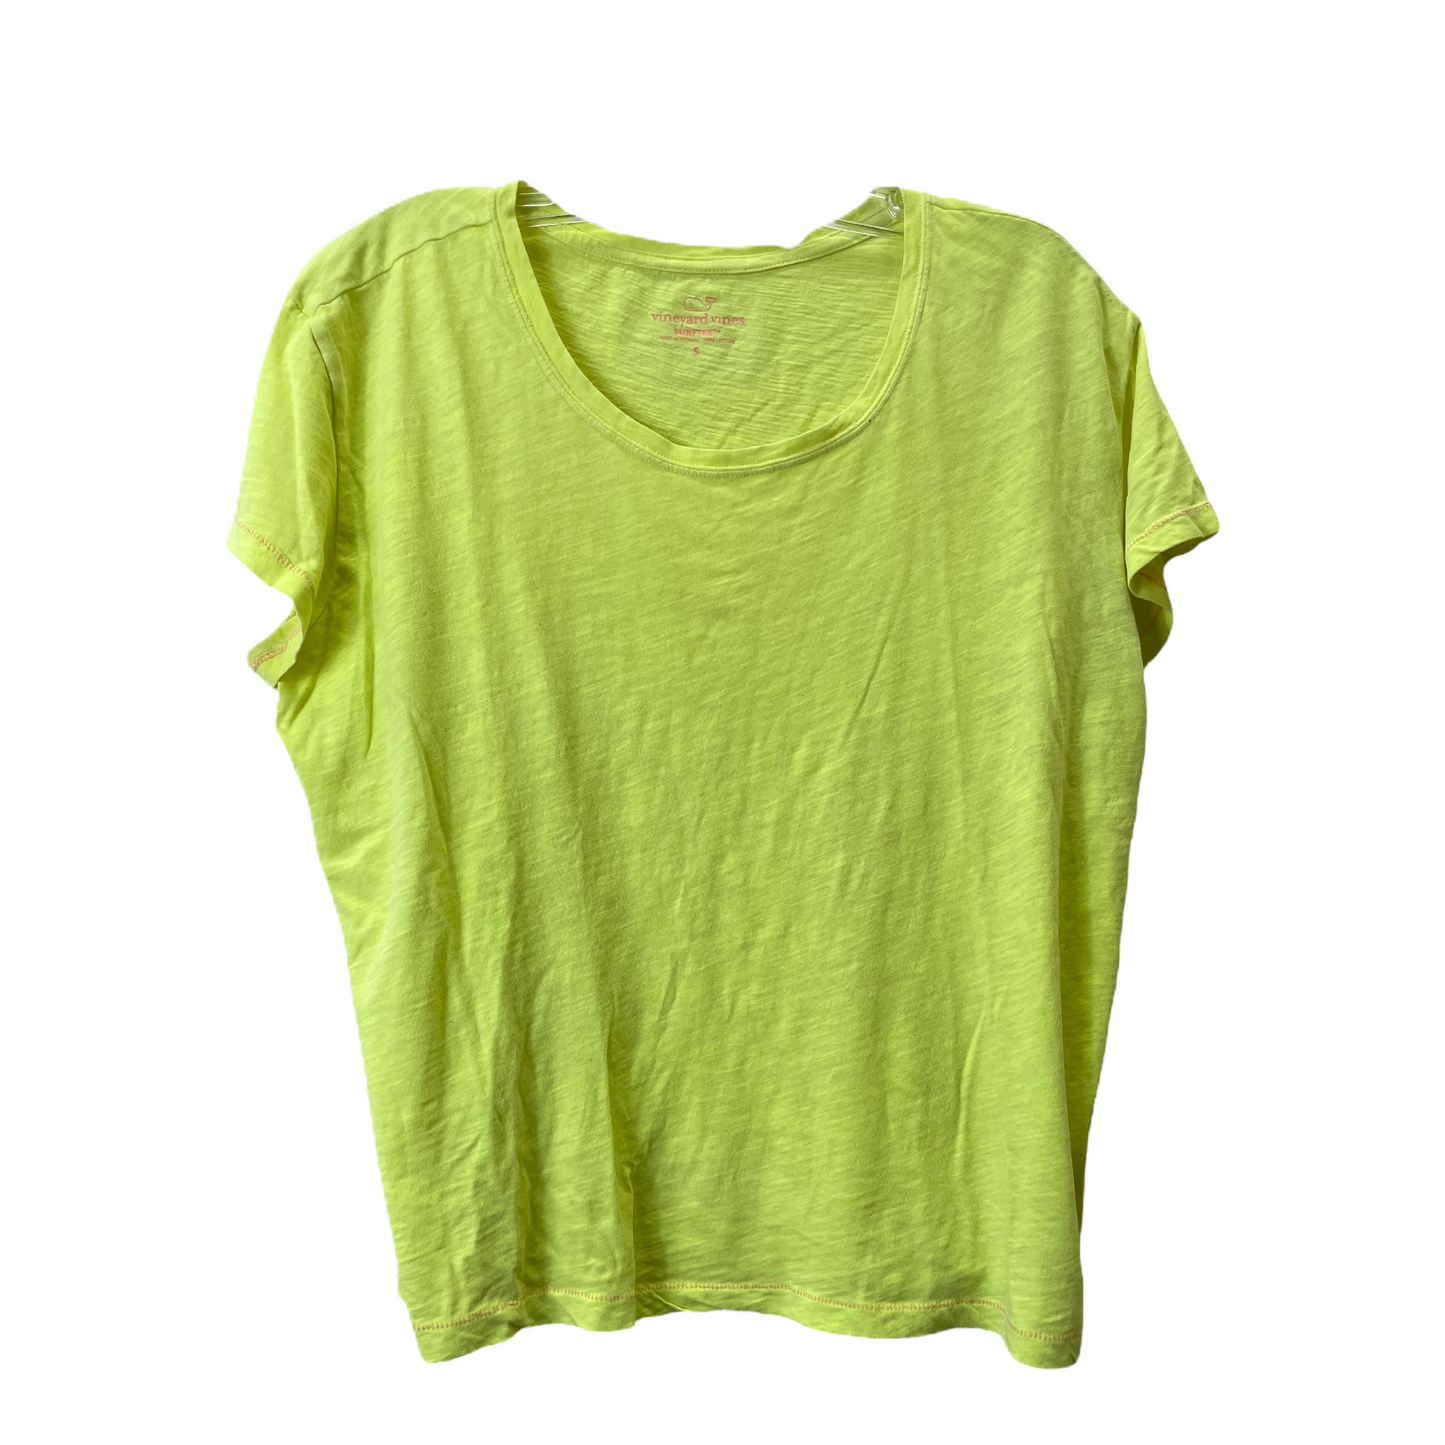 Yellow Top Short Sleeve Basic By Vineyard Vines, Size: S